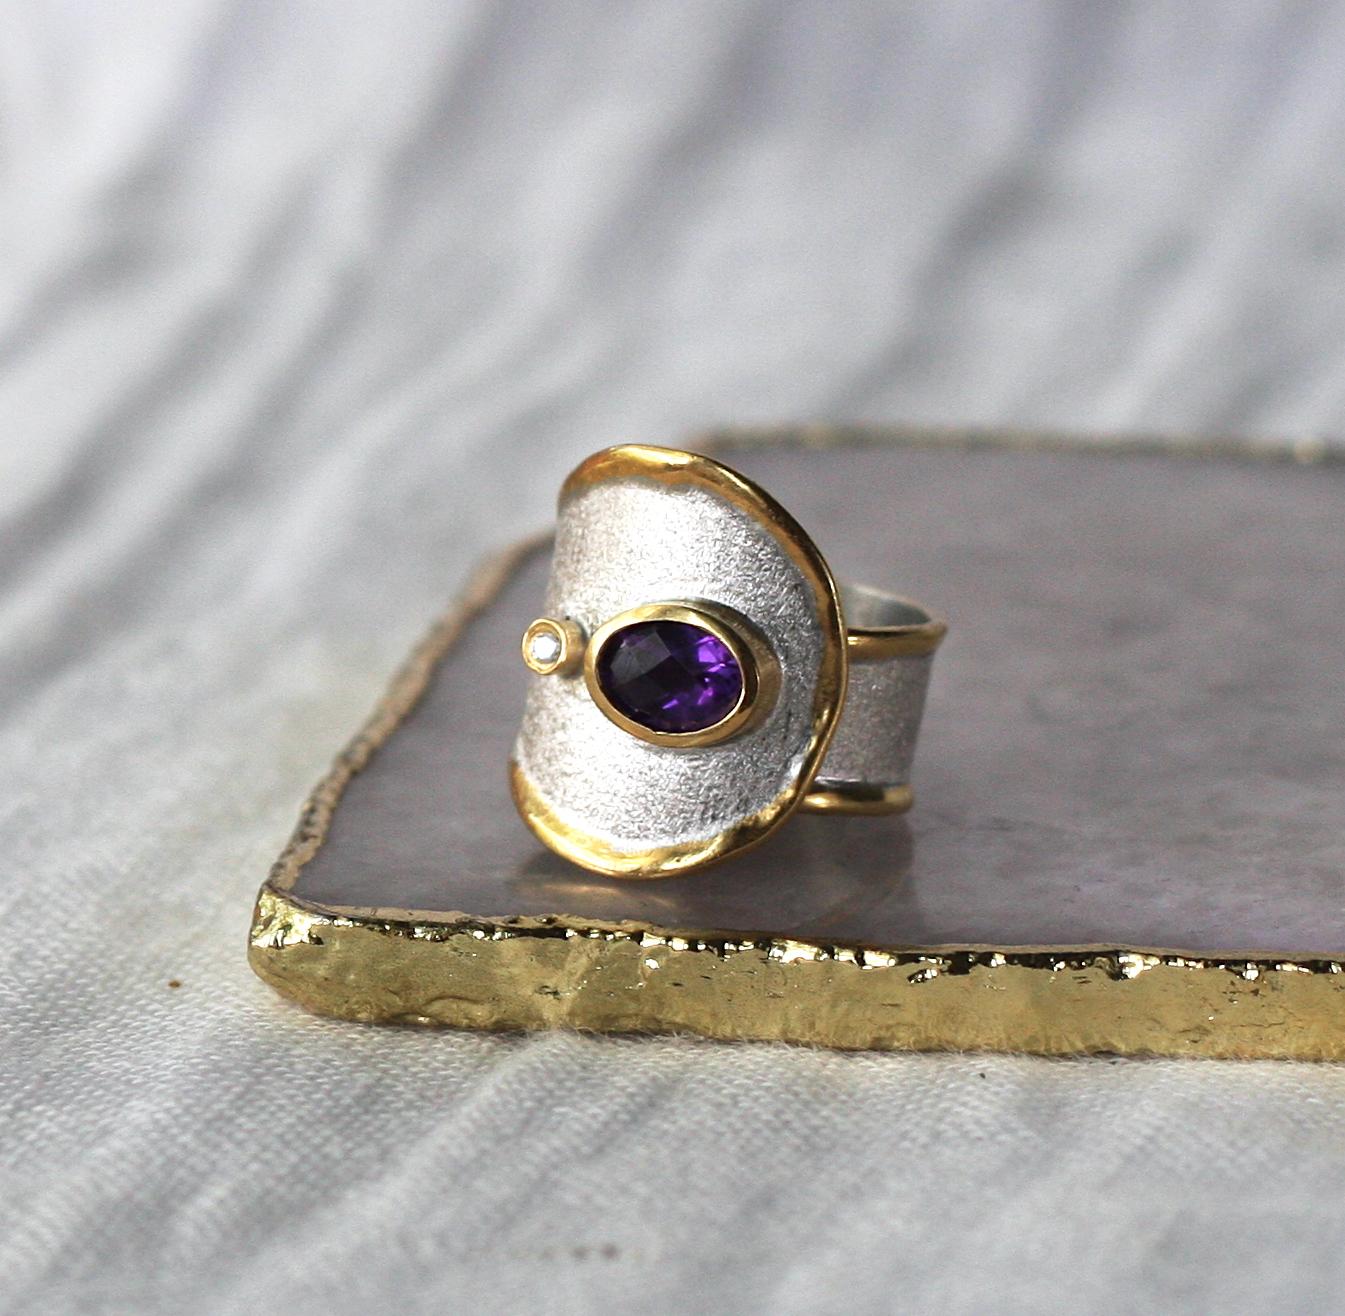 Yianni Creations 1.25 Amethyst and Diamond Ring in Fine Silver and 24 Karat Gold 1